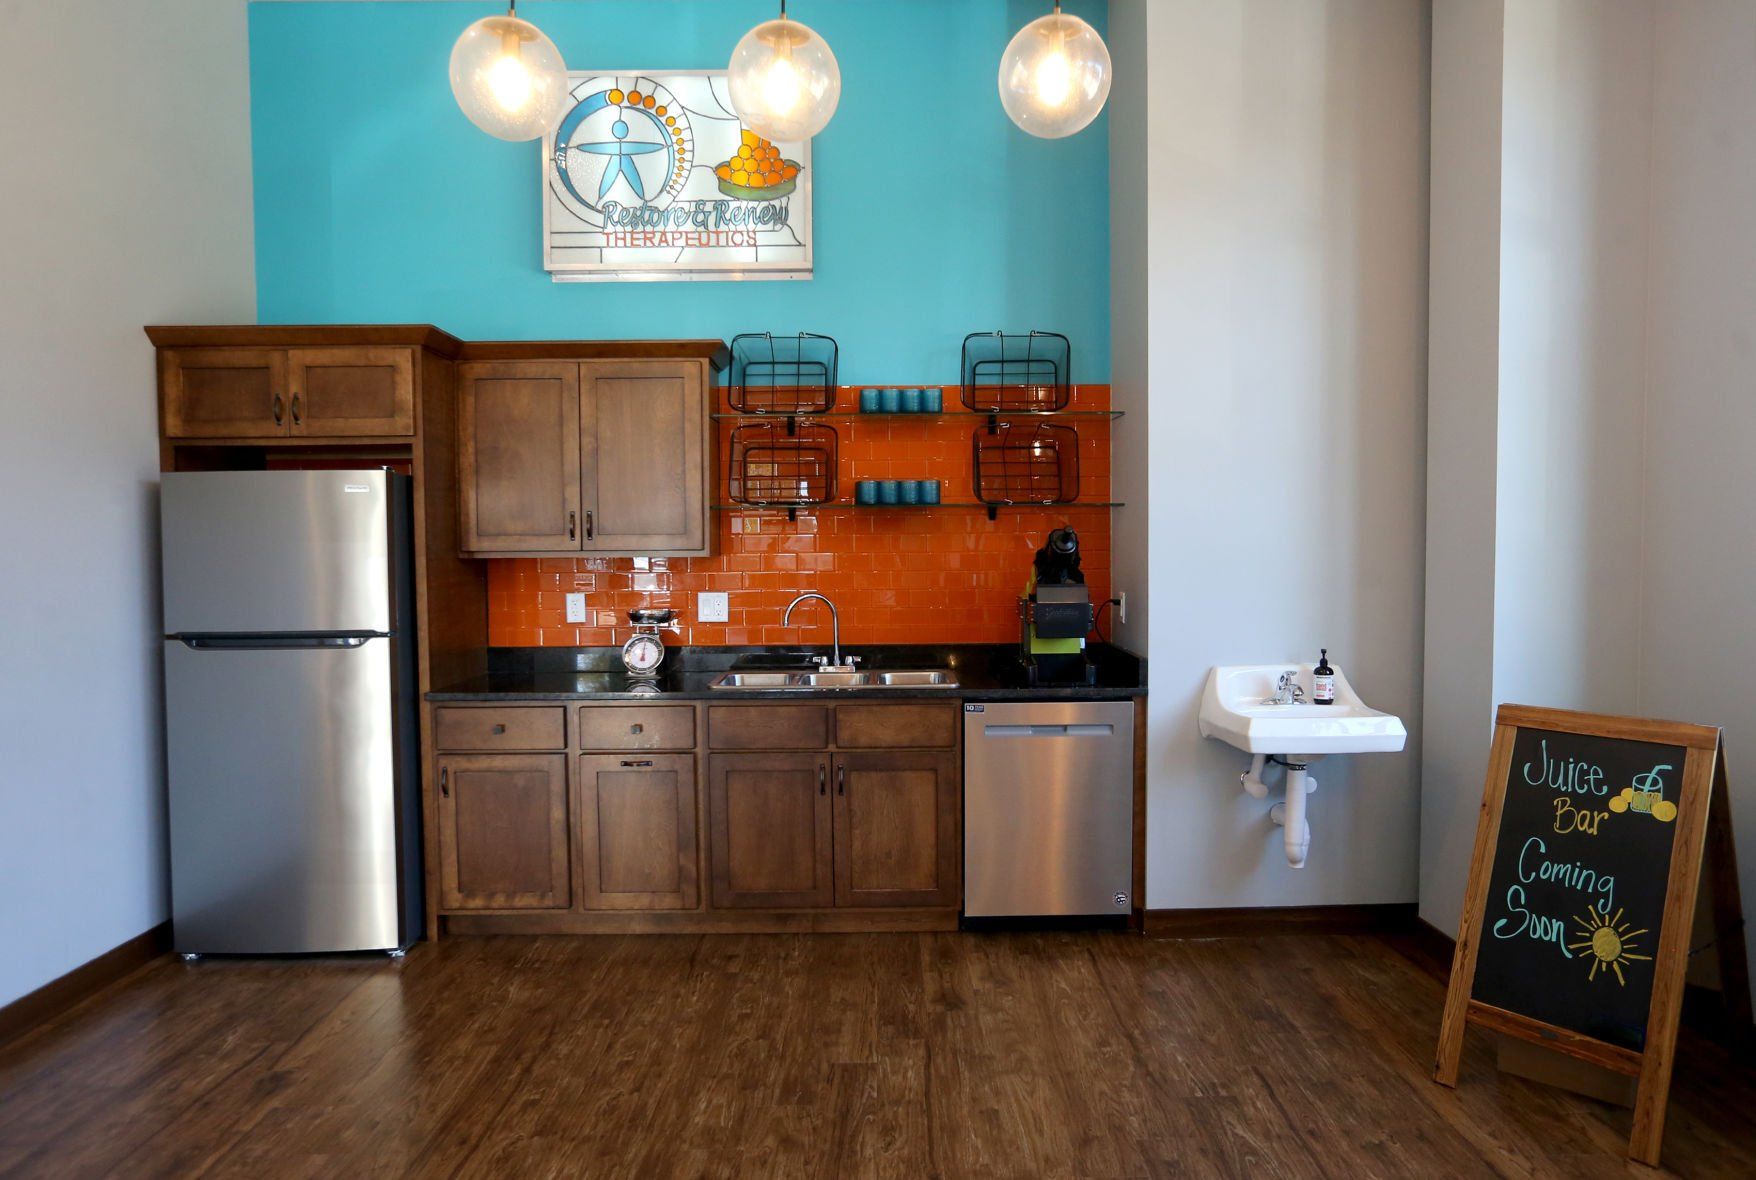 A juice bar at Restore and Renew Therapeutics in Asbury, Iowa.    PHOTO CREDIT: JESSICA REILLY